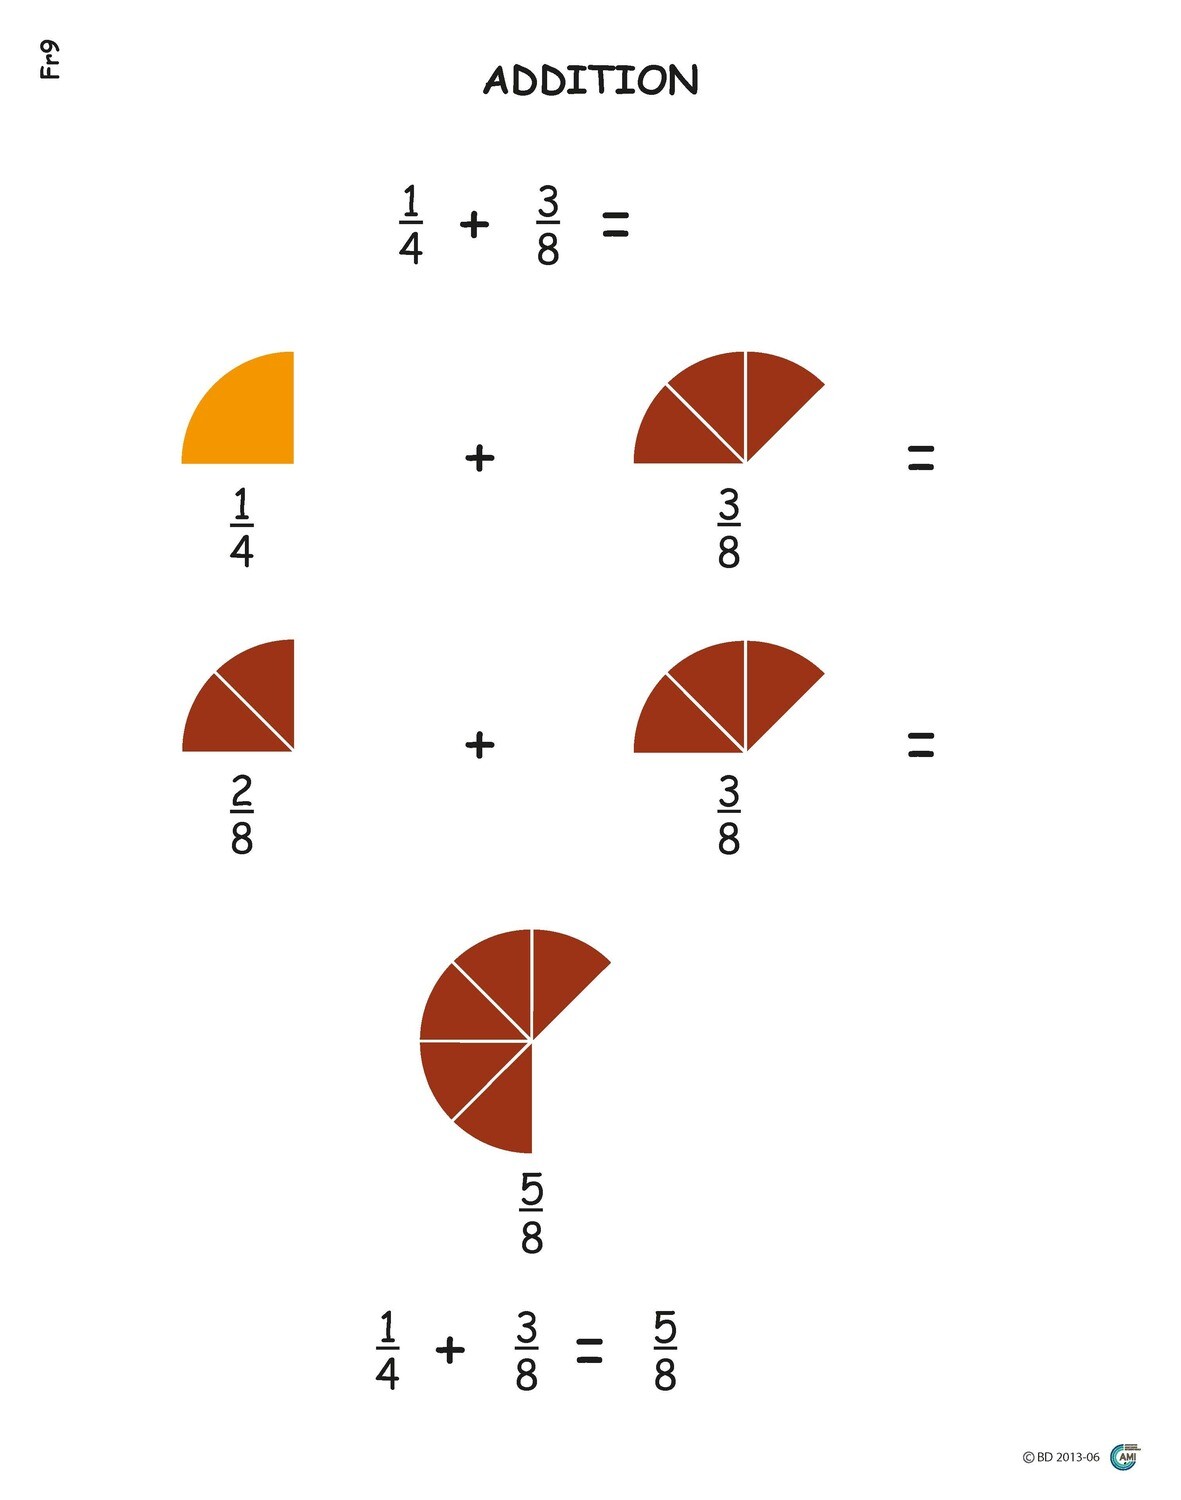 21 CHARTS FRACTIONS (NOW INCLUDED IN THE FULL SET)